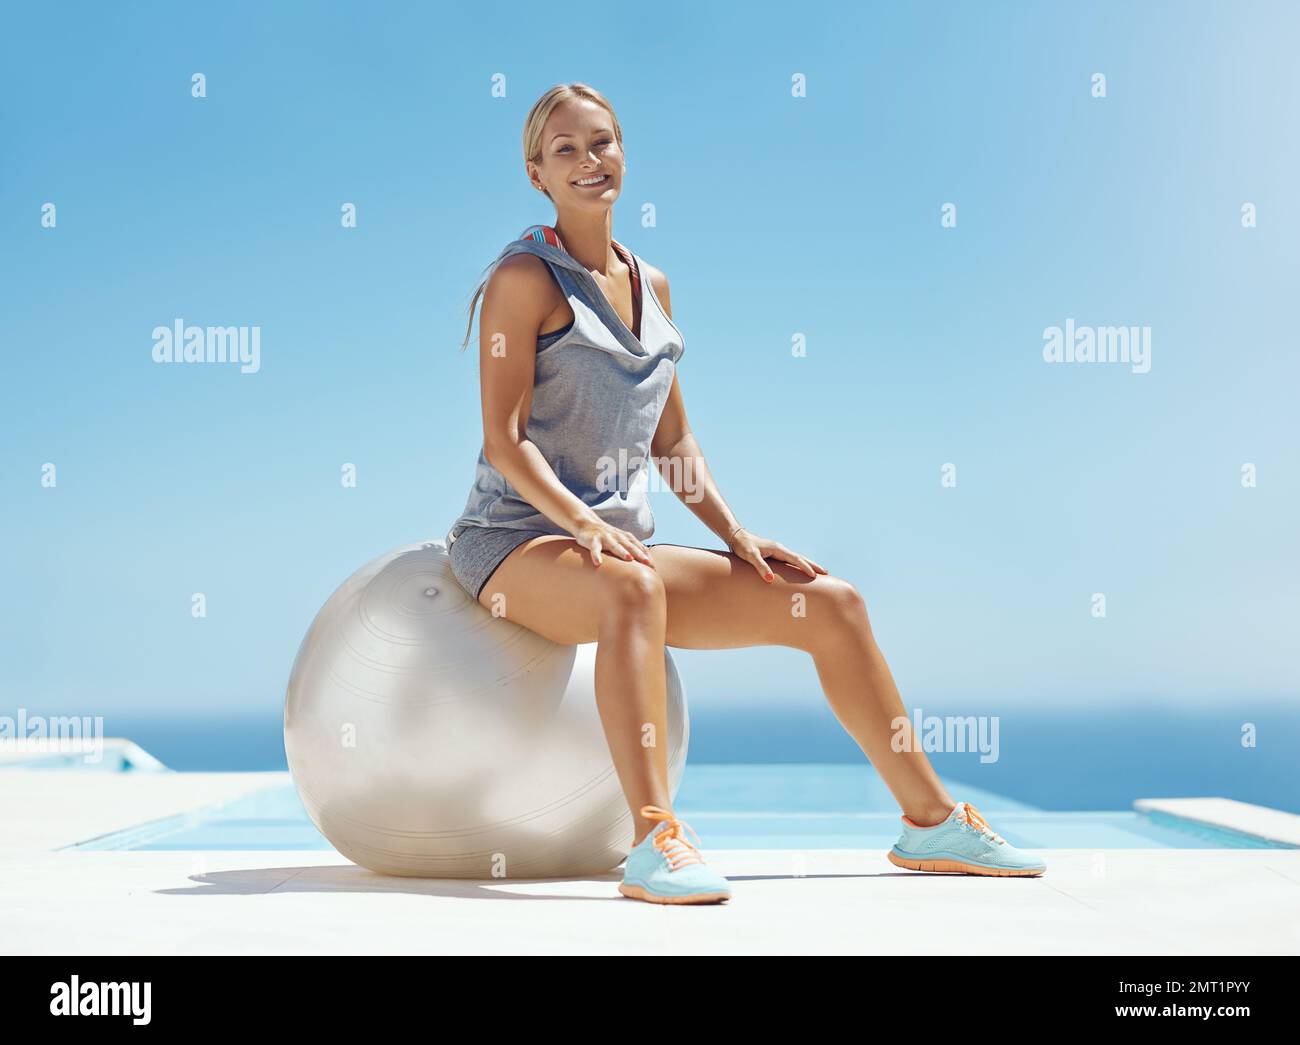 https://c8.alamy.com/comp/2MT1PYY/working-out-makes-me-happy-full-length-portrait-of-an-attractive-young-woman-sitting-on-an-exercise-ball-by-the-pool-after-her-workout-2MT1PYY.jpg